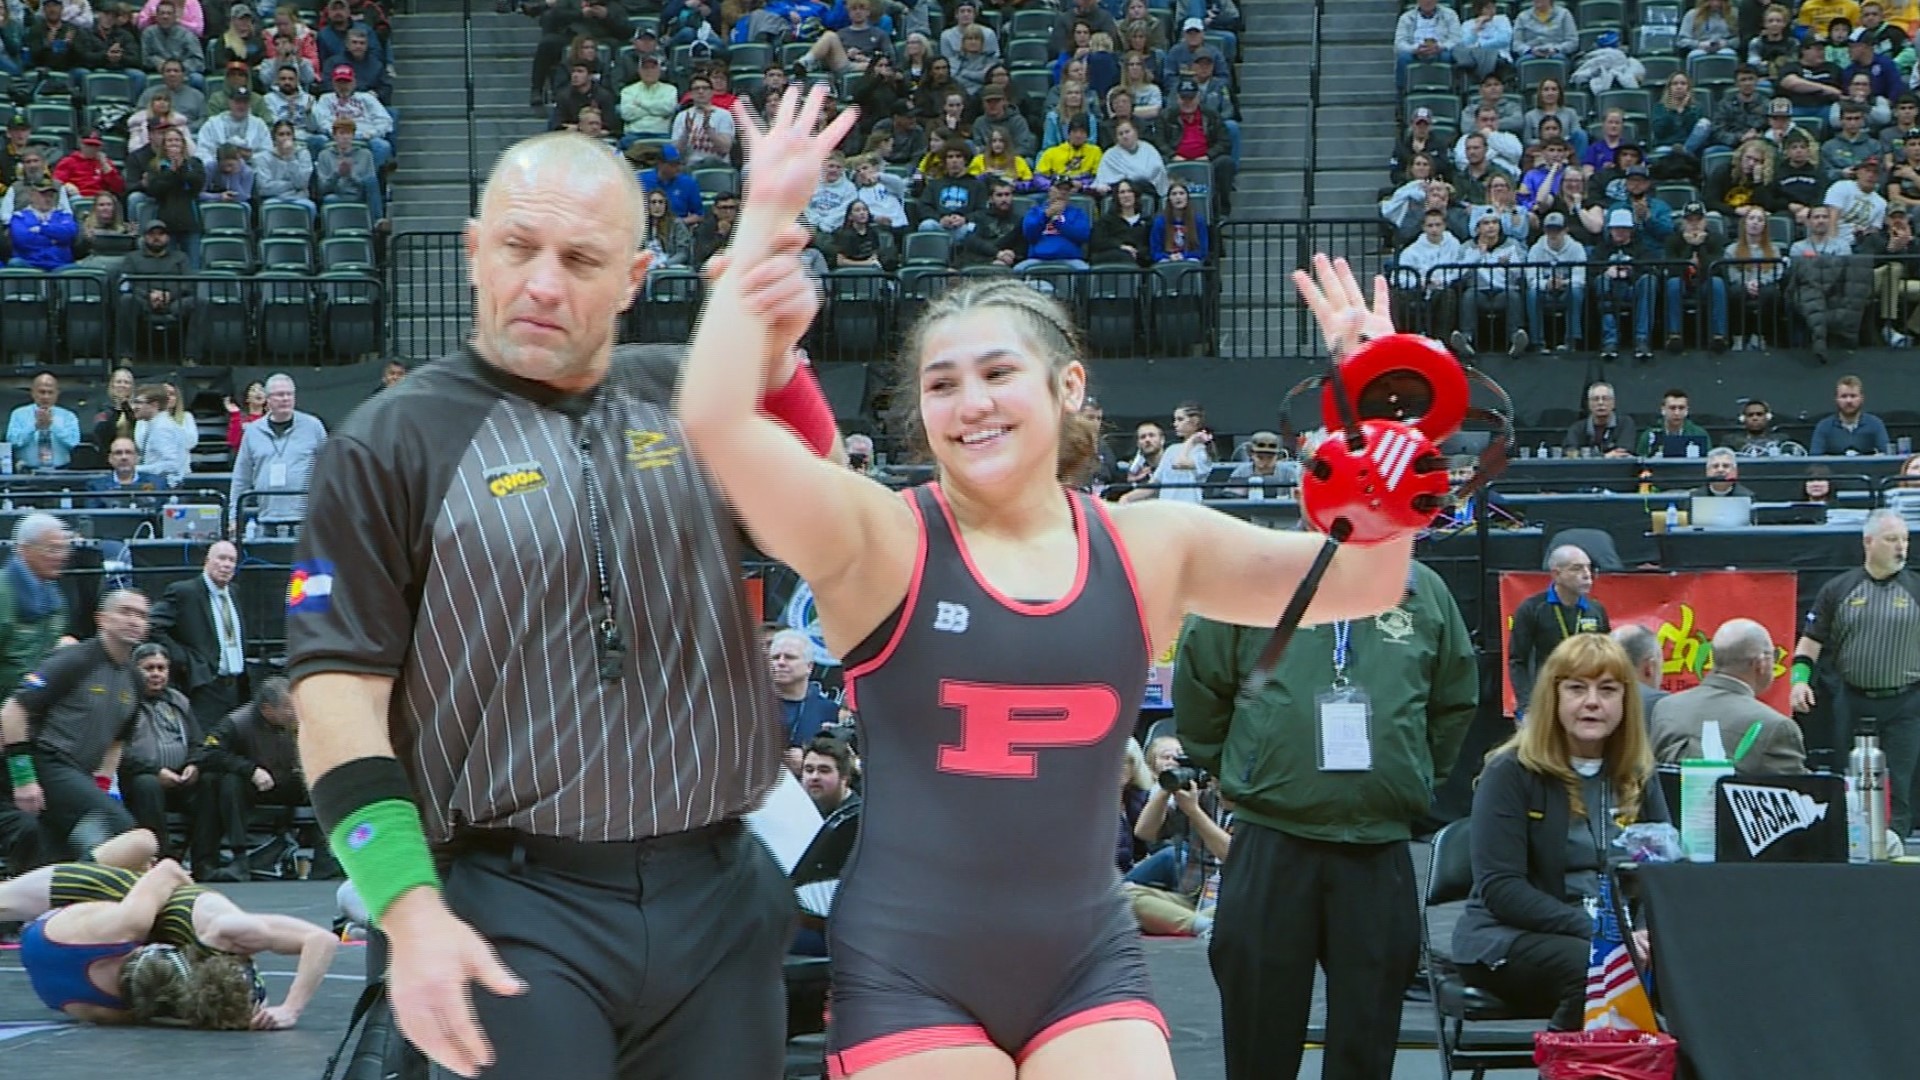 Pomona won the Class 5A title for the sixth straight year, while Mead (4A) and Mullen (3A) captured their first team championships in school history.